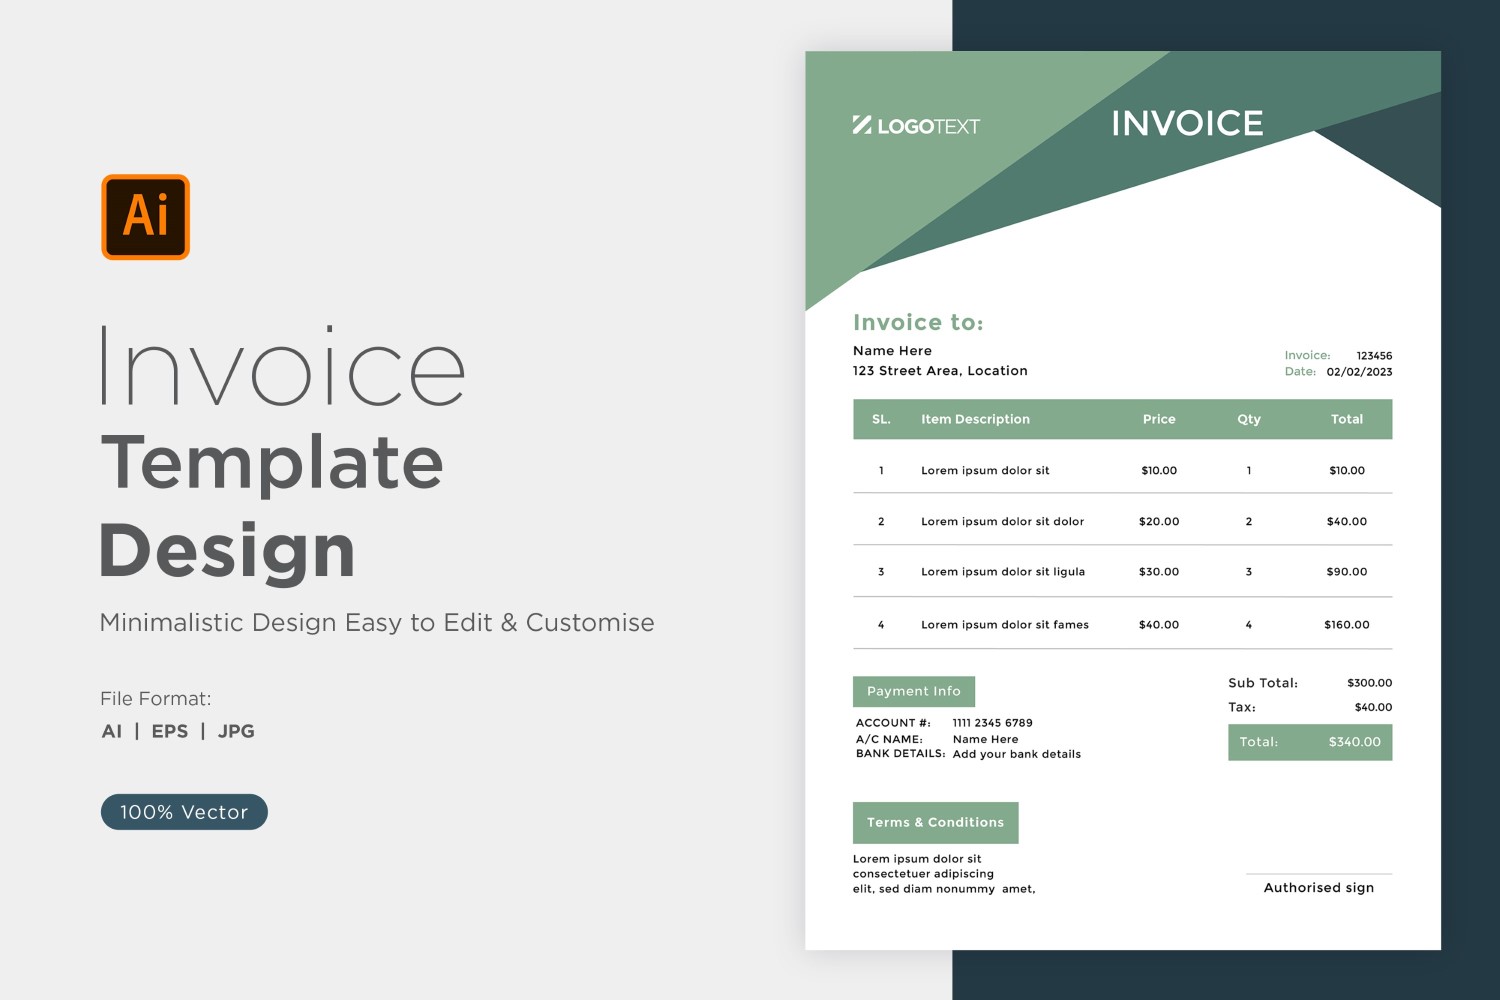 Corporate Invoice Design Template Bill form Business Payments Details Design Template 100